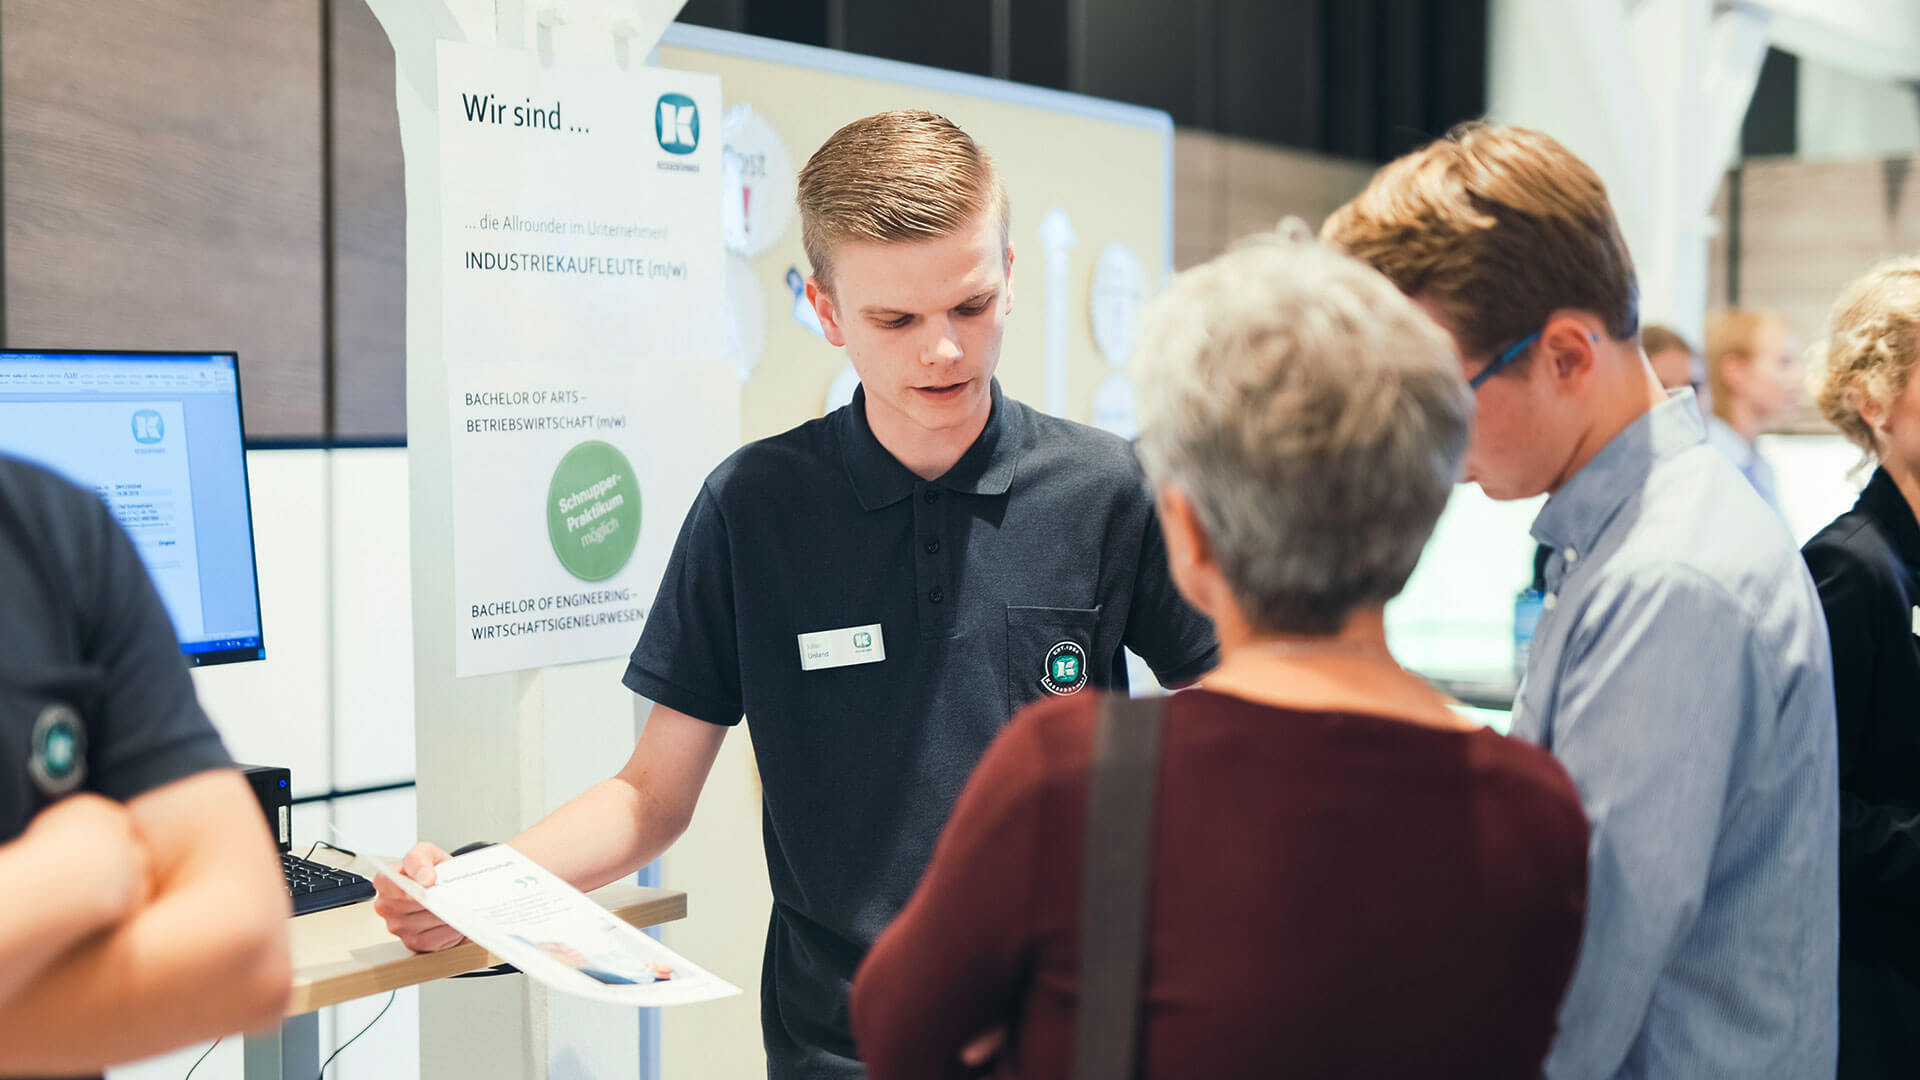 Post-event report: Open evening for prospective trainees at Kesseböhmer